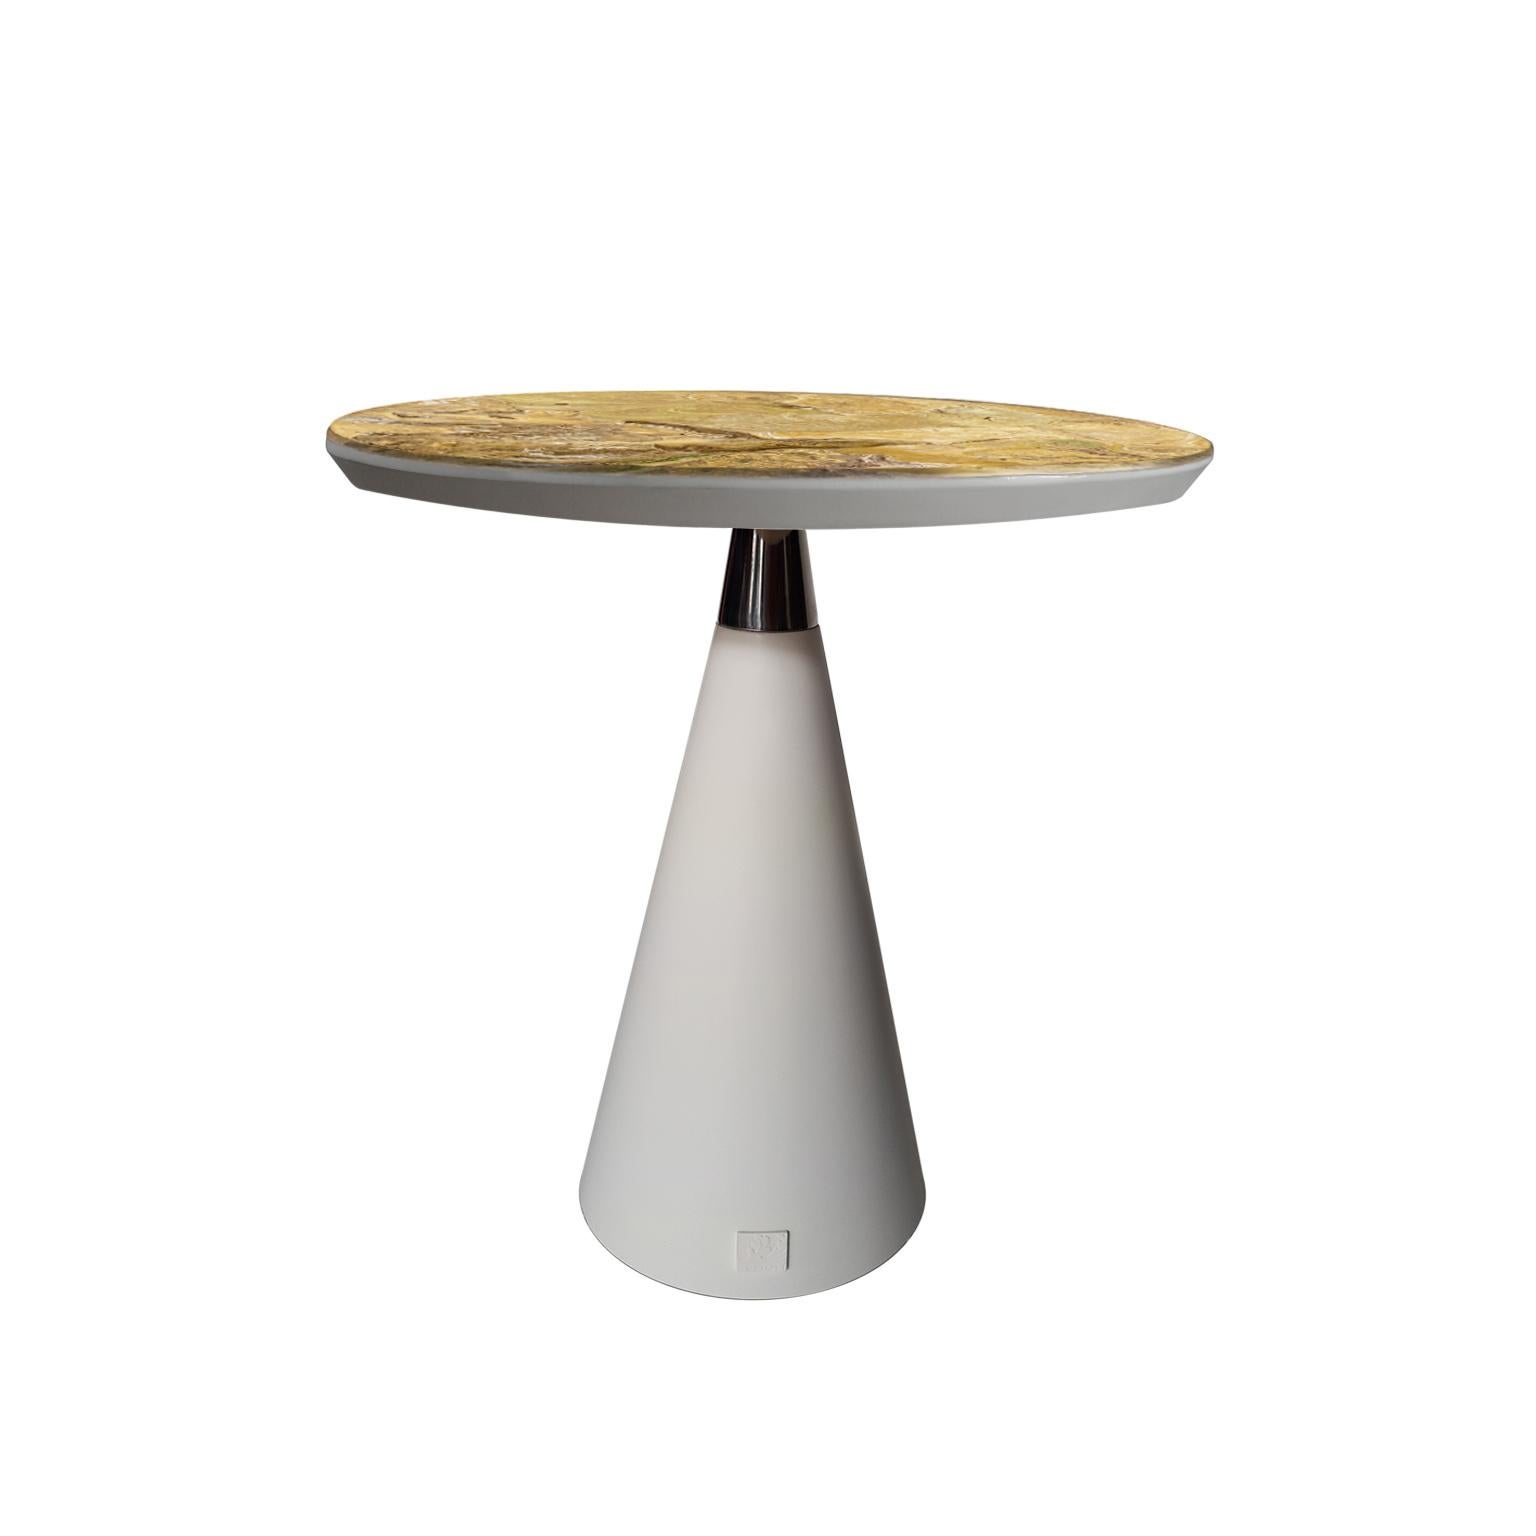 Modern Round side table wooden base scagliola art top handmade in Italy by Cupioli For Sale